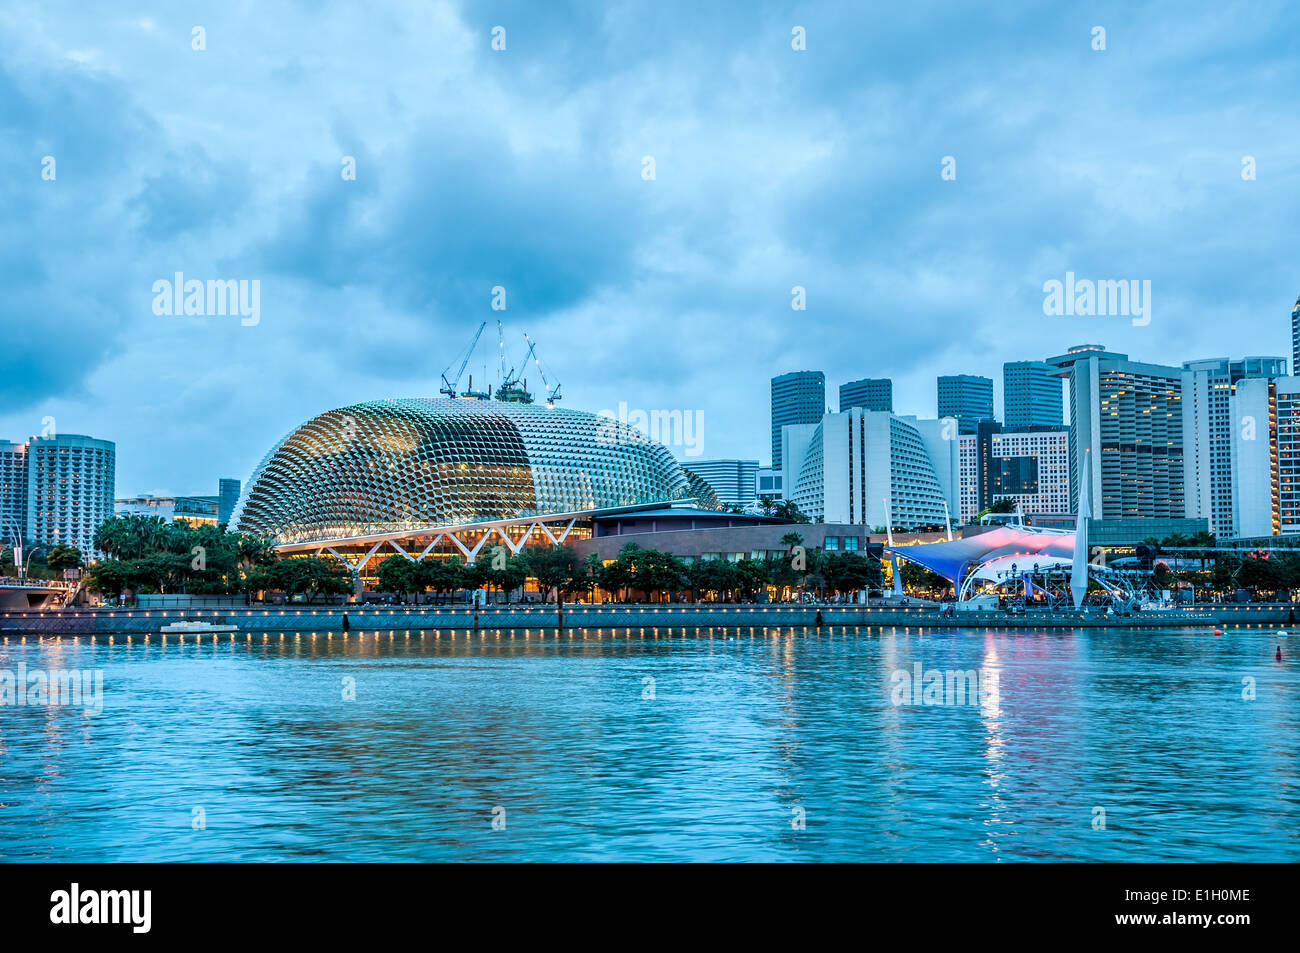 The skyline of Singapore at night, with the Esplanade lit up. Stock Photo